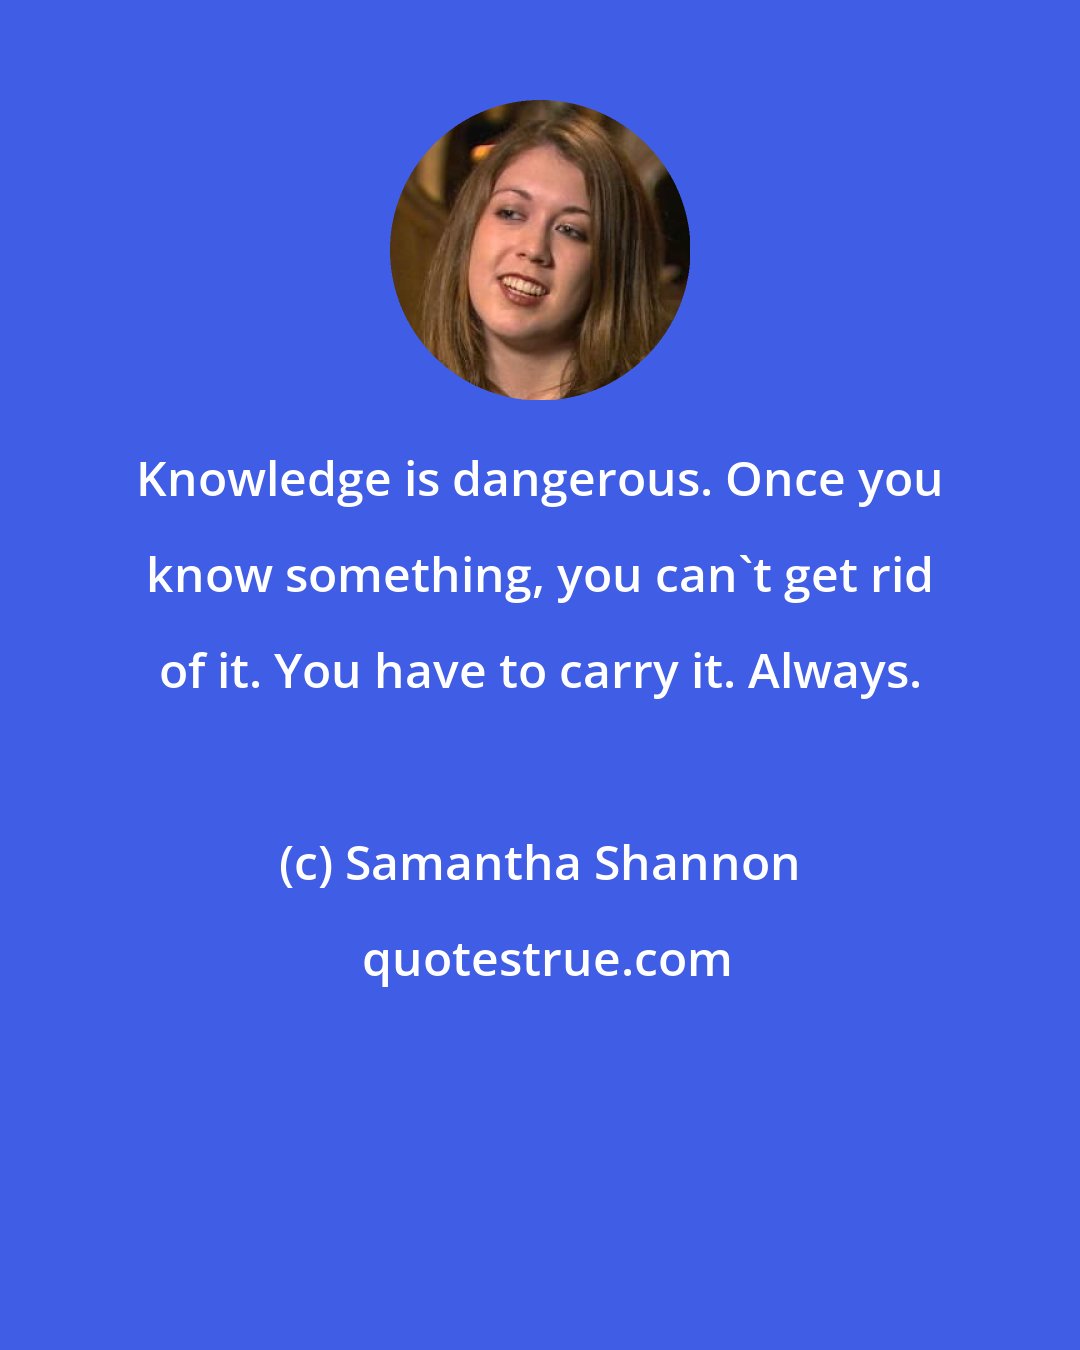 Samantha Shannon: Knowledge is dangerous. Once you know something, you can't get rid of it. You have to carry it. Always.